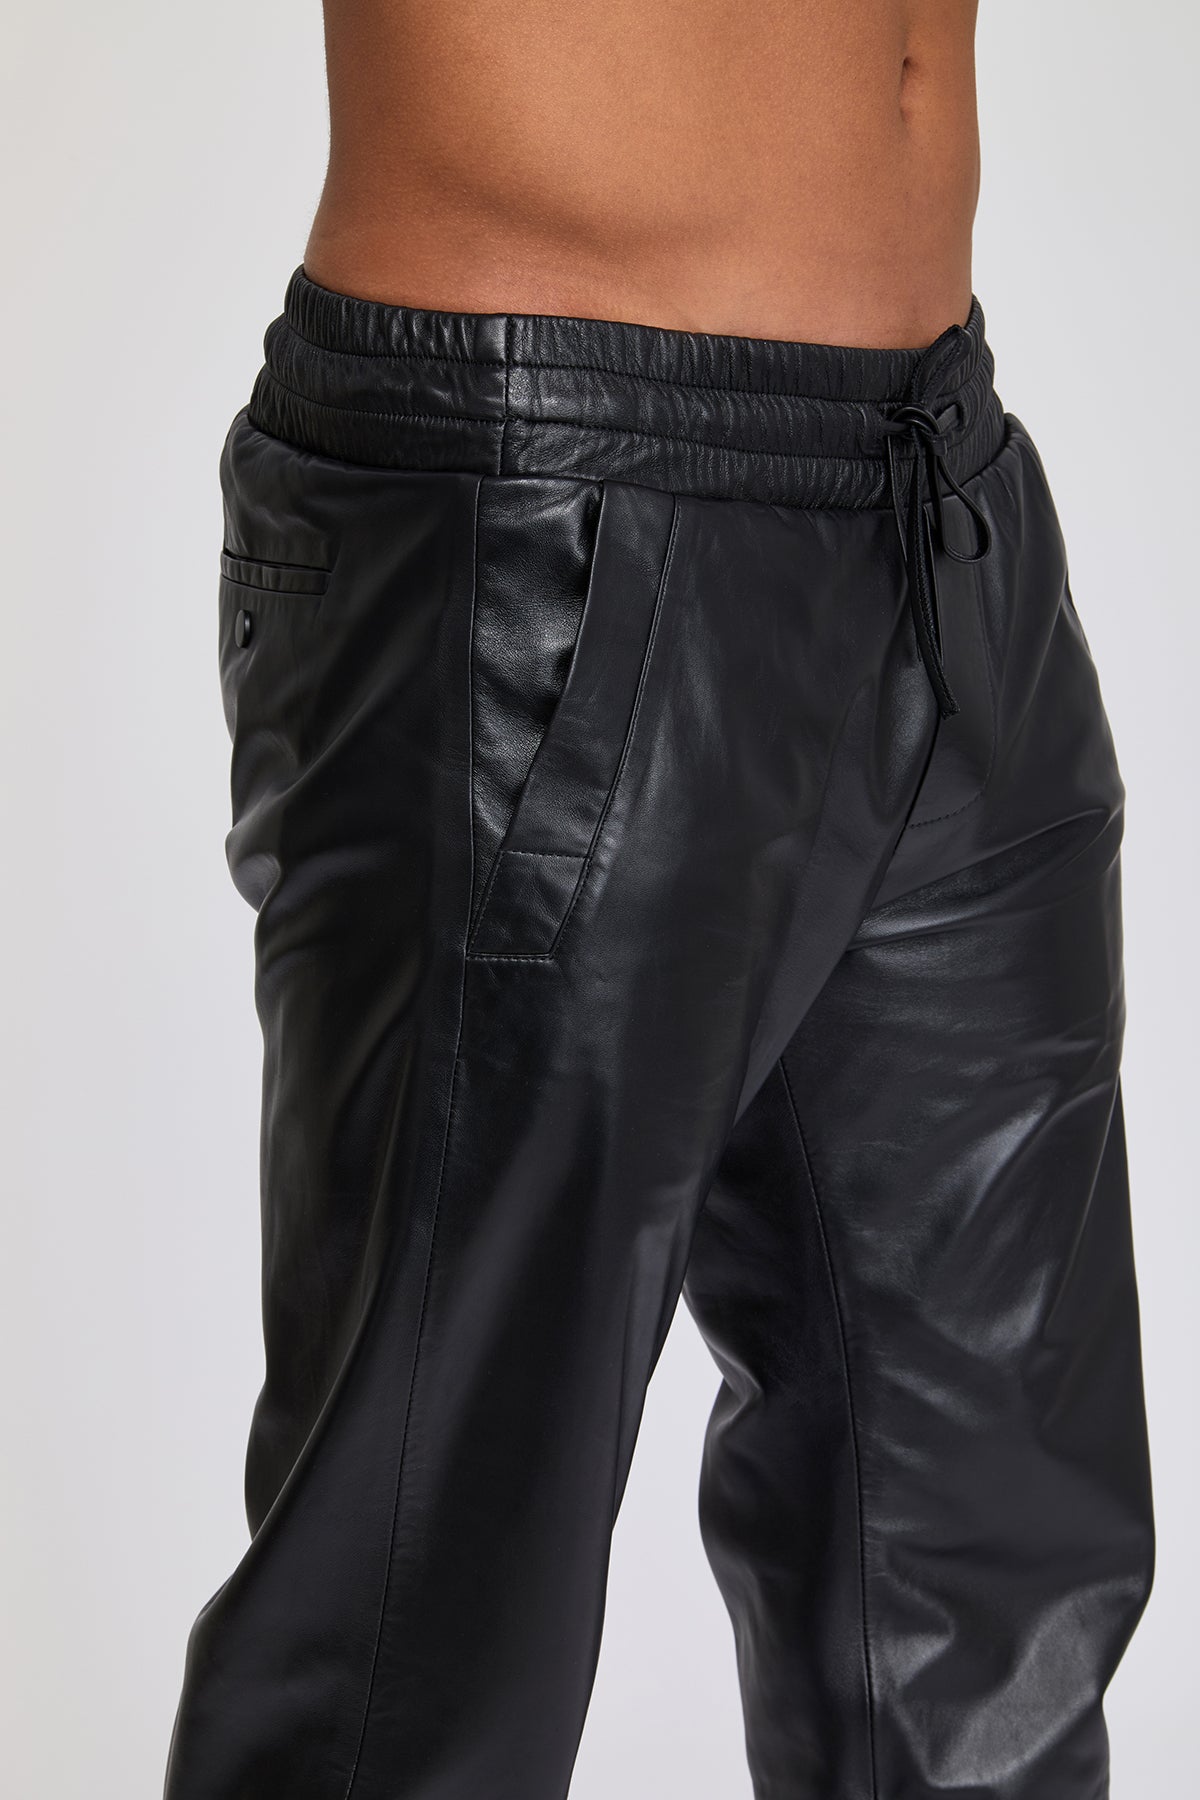 Genuine Leather Gay Laces Pants